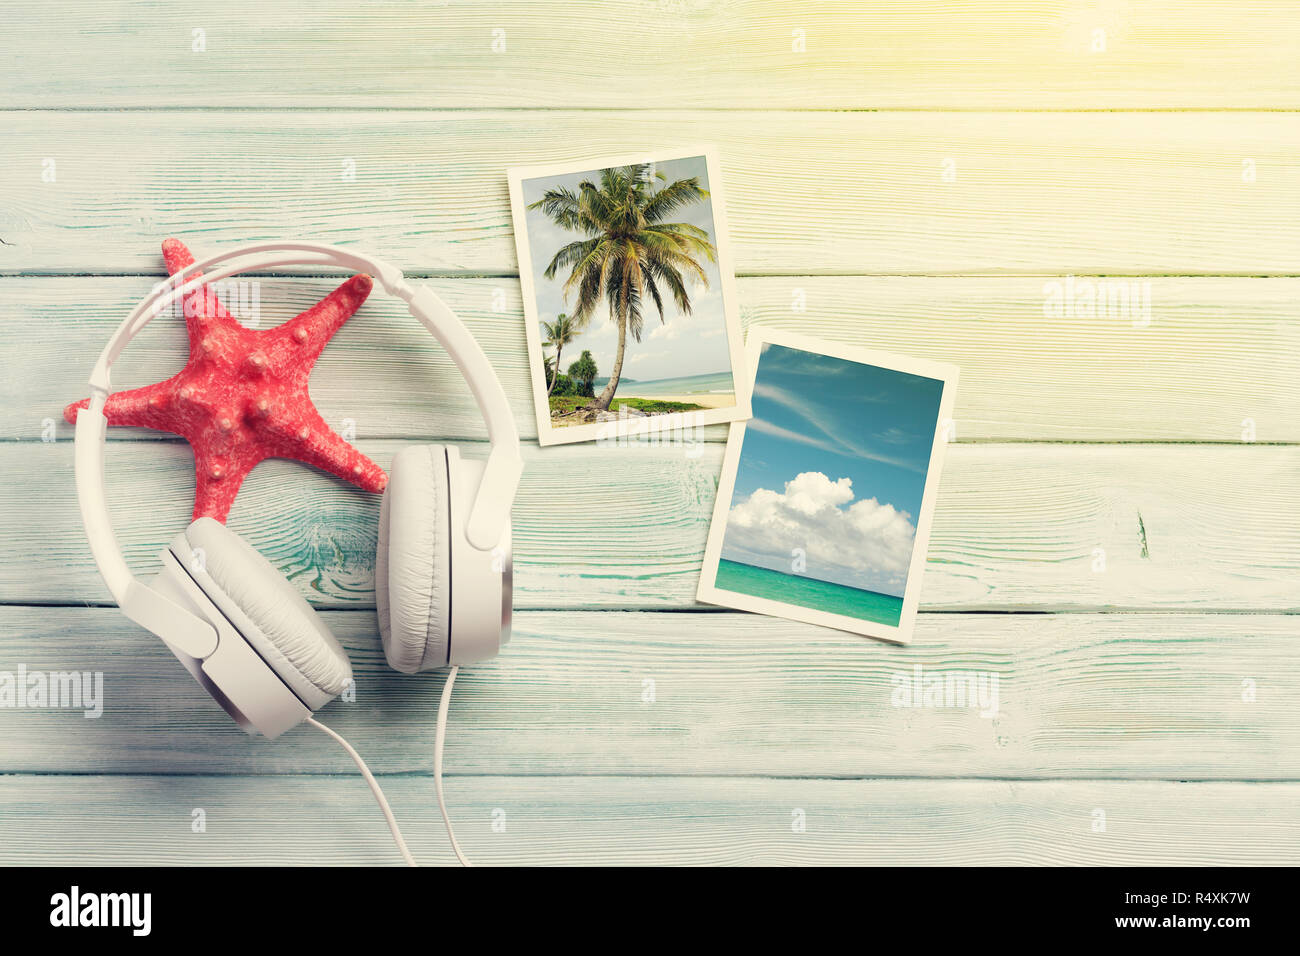 Travel vacation and music concept with headphones, starfish and photos on wooden backdrop. Top view with copy space. Flat lay. All photos taken by me. Stock Photo